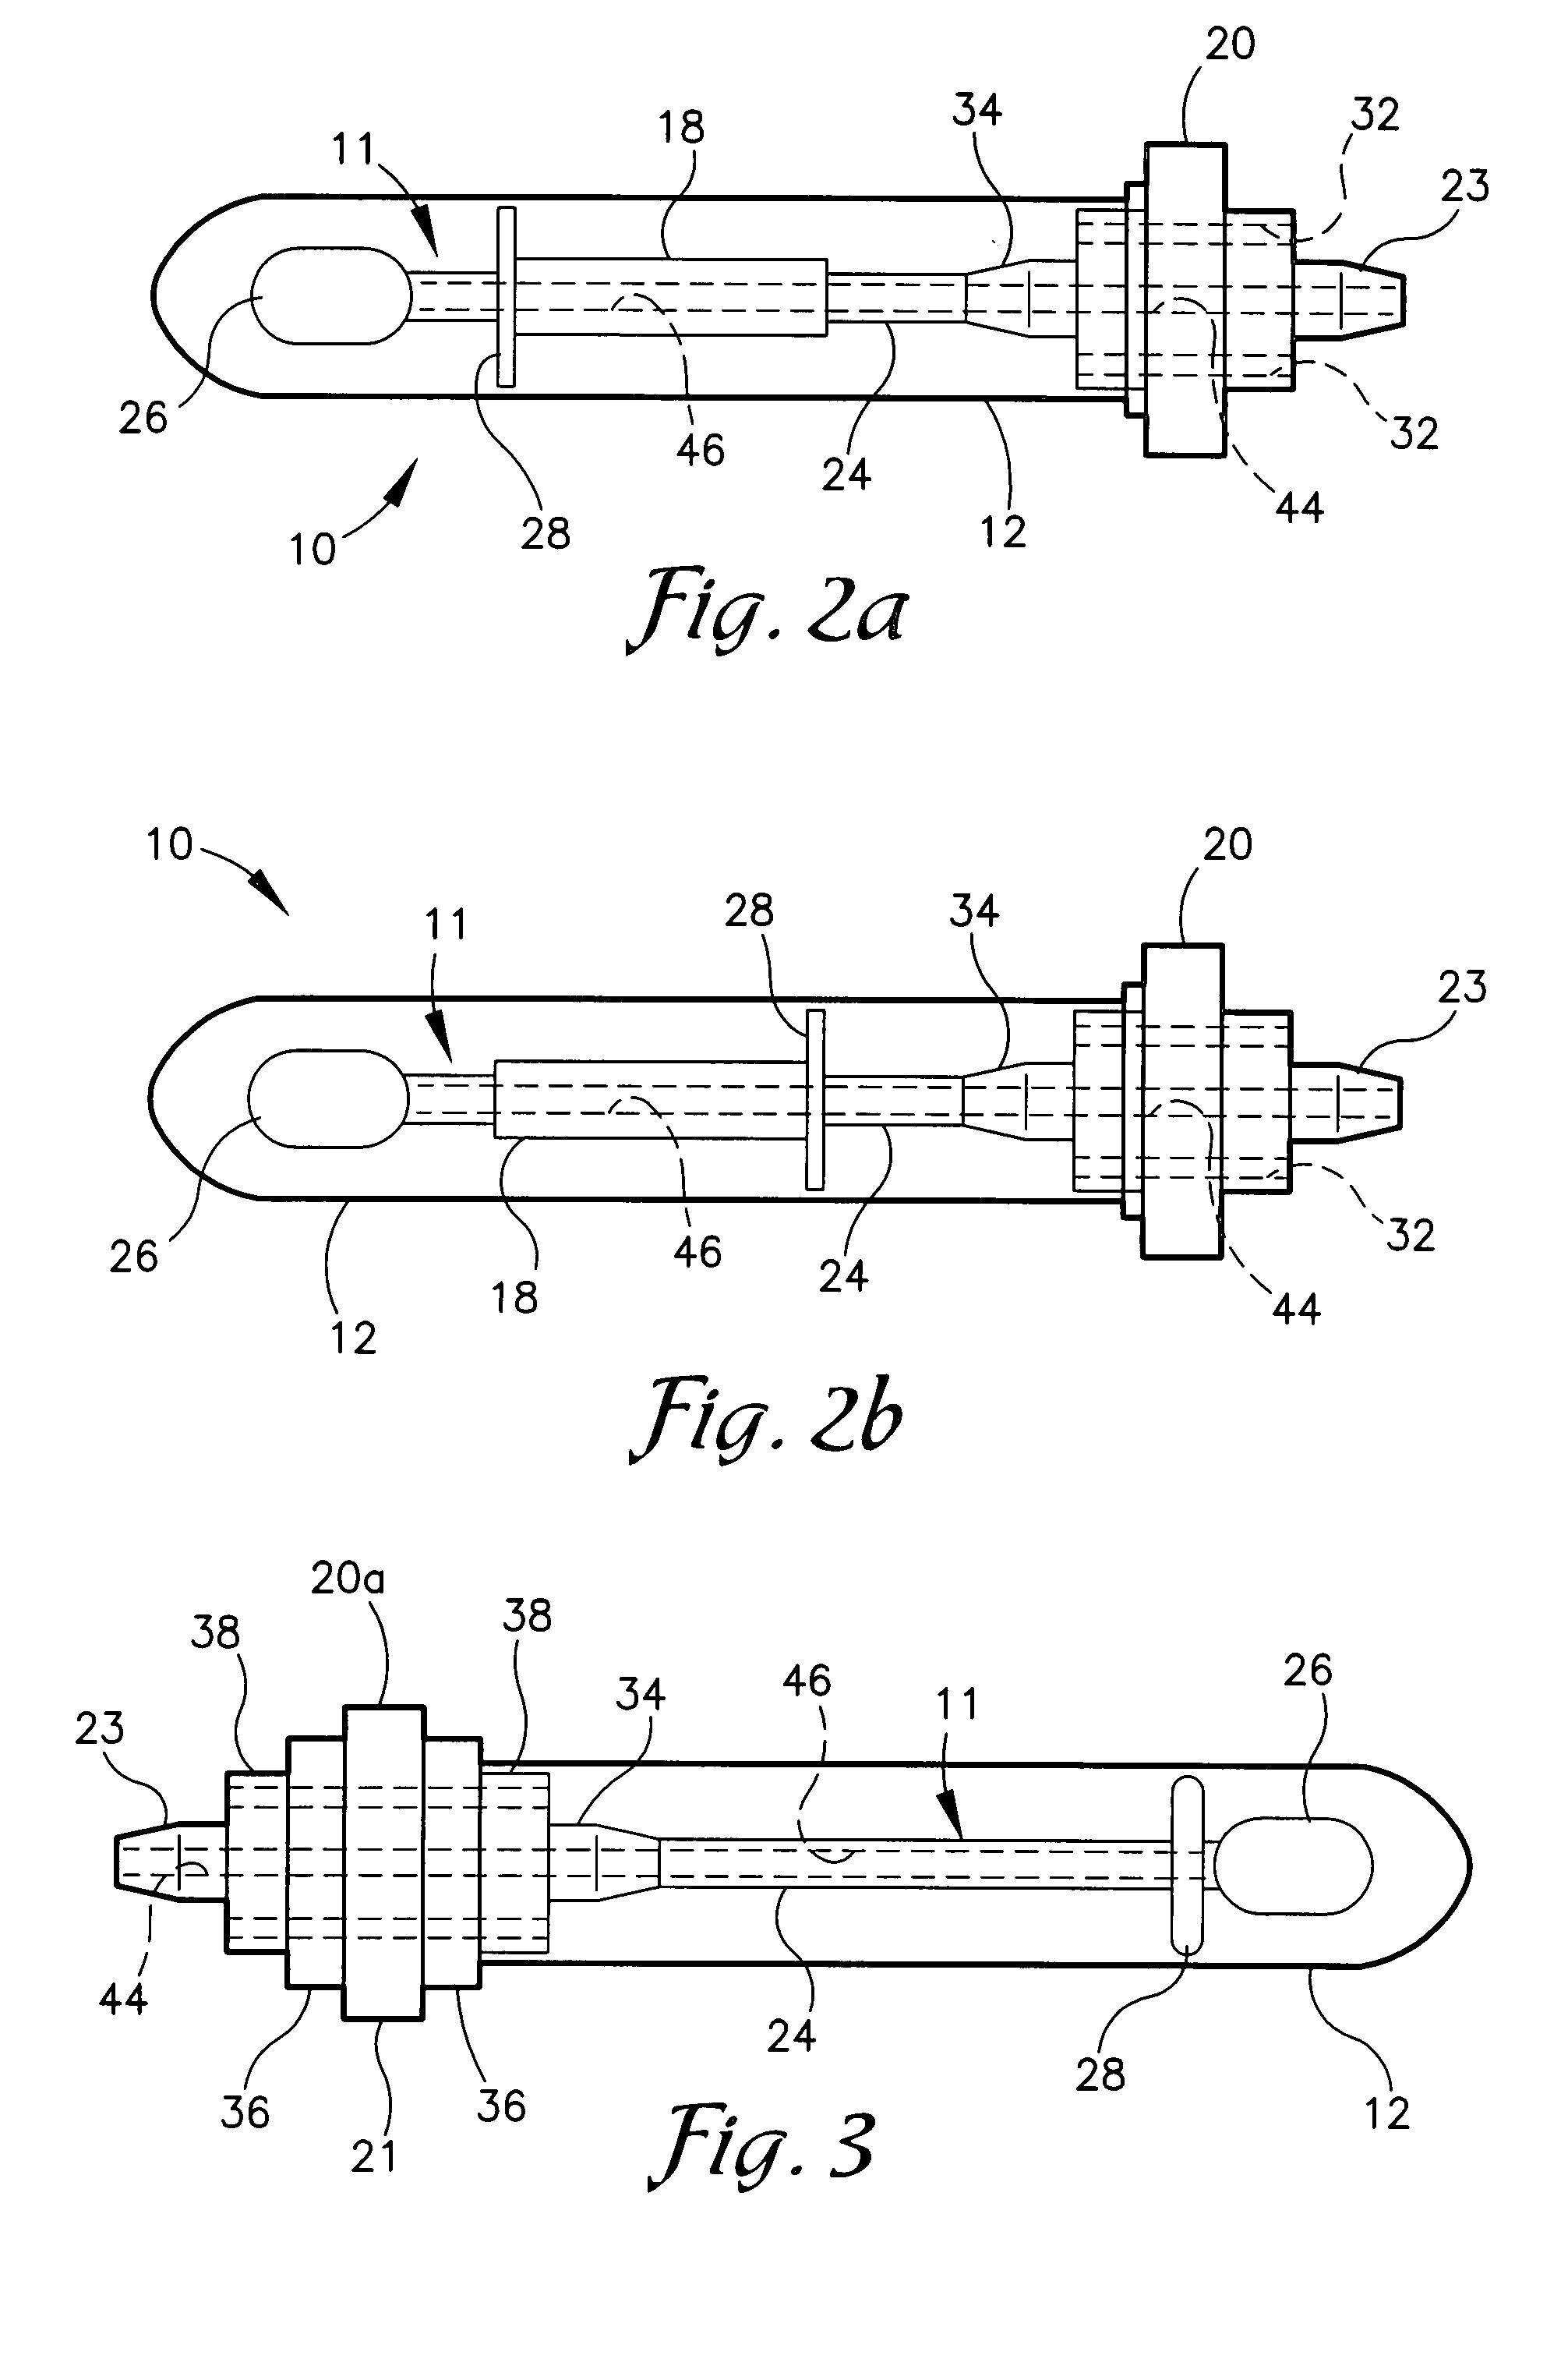 Low pressure sample collection apparatus